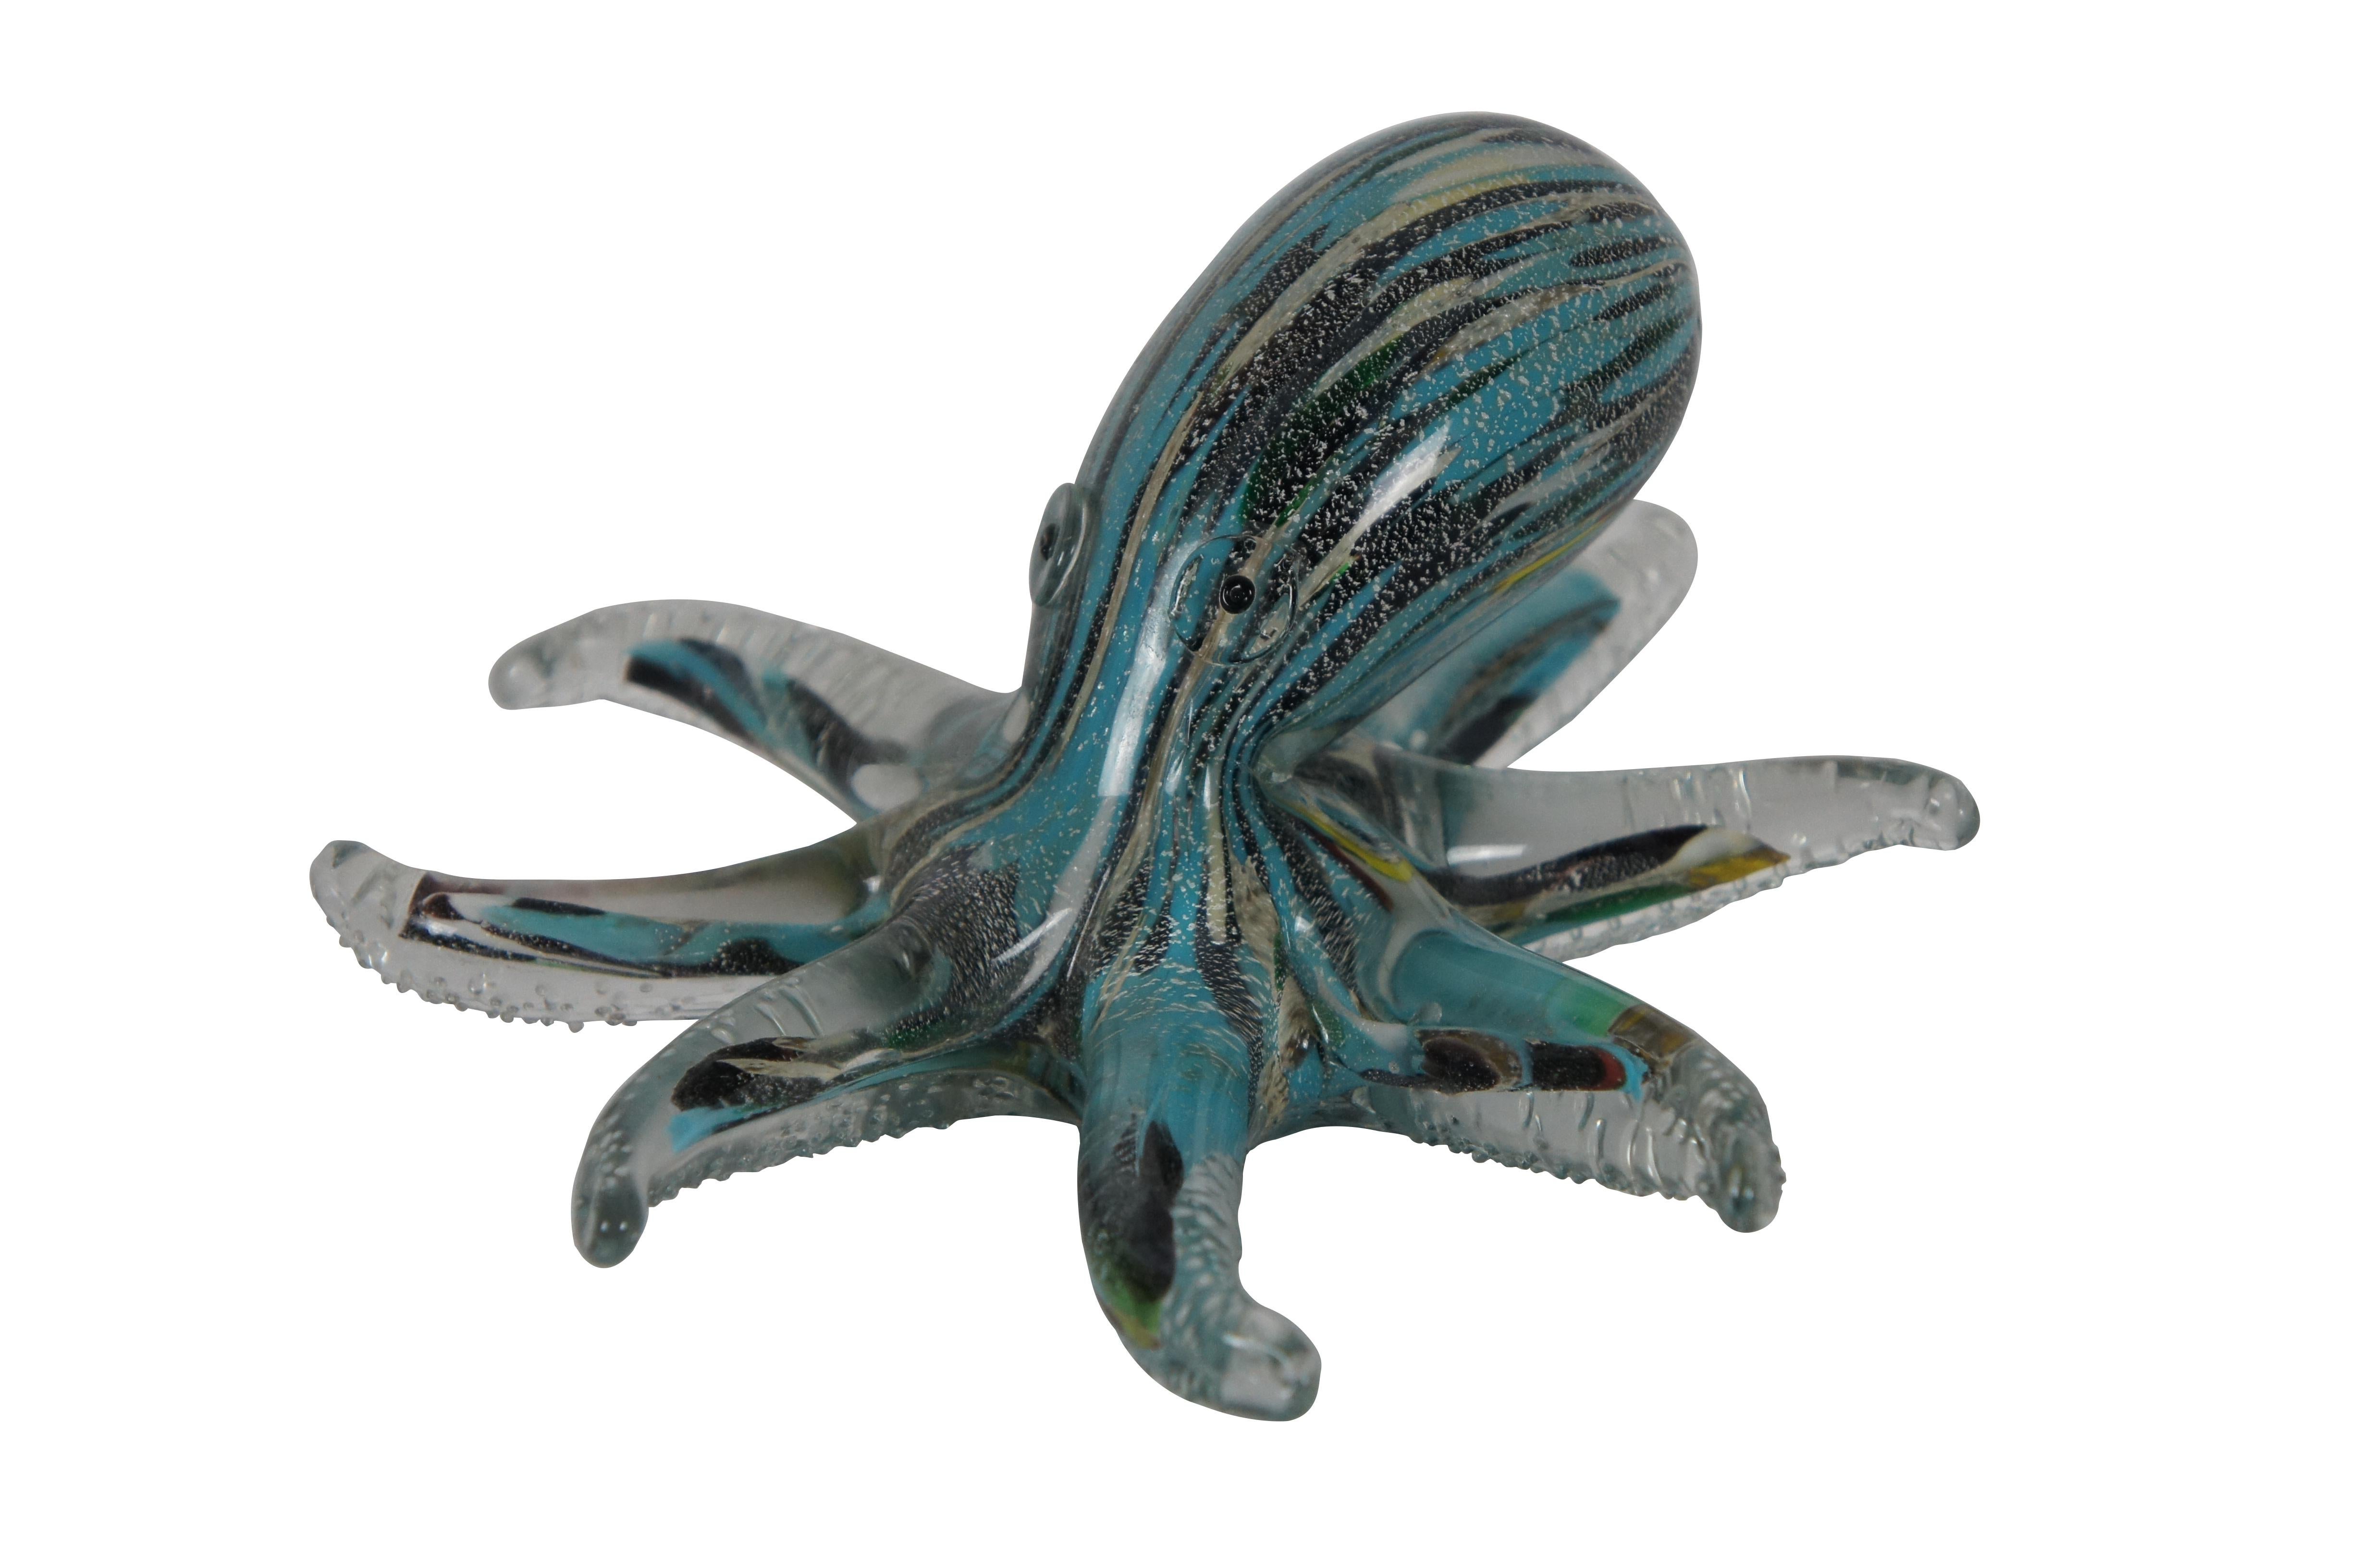 Vibrant Octopus sculpture by Archimede Seguso for Murano.  Features an elegant shape with swirls of turquoise, black, green and clear.

Dimensions:
7.25